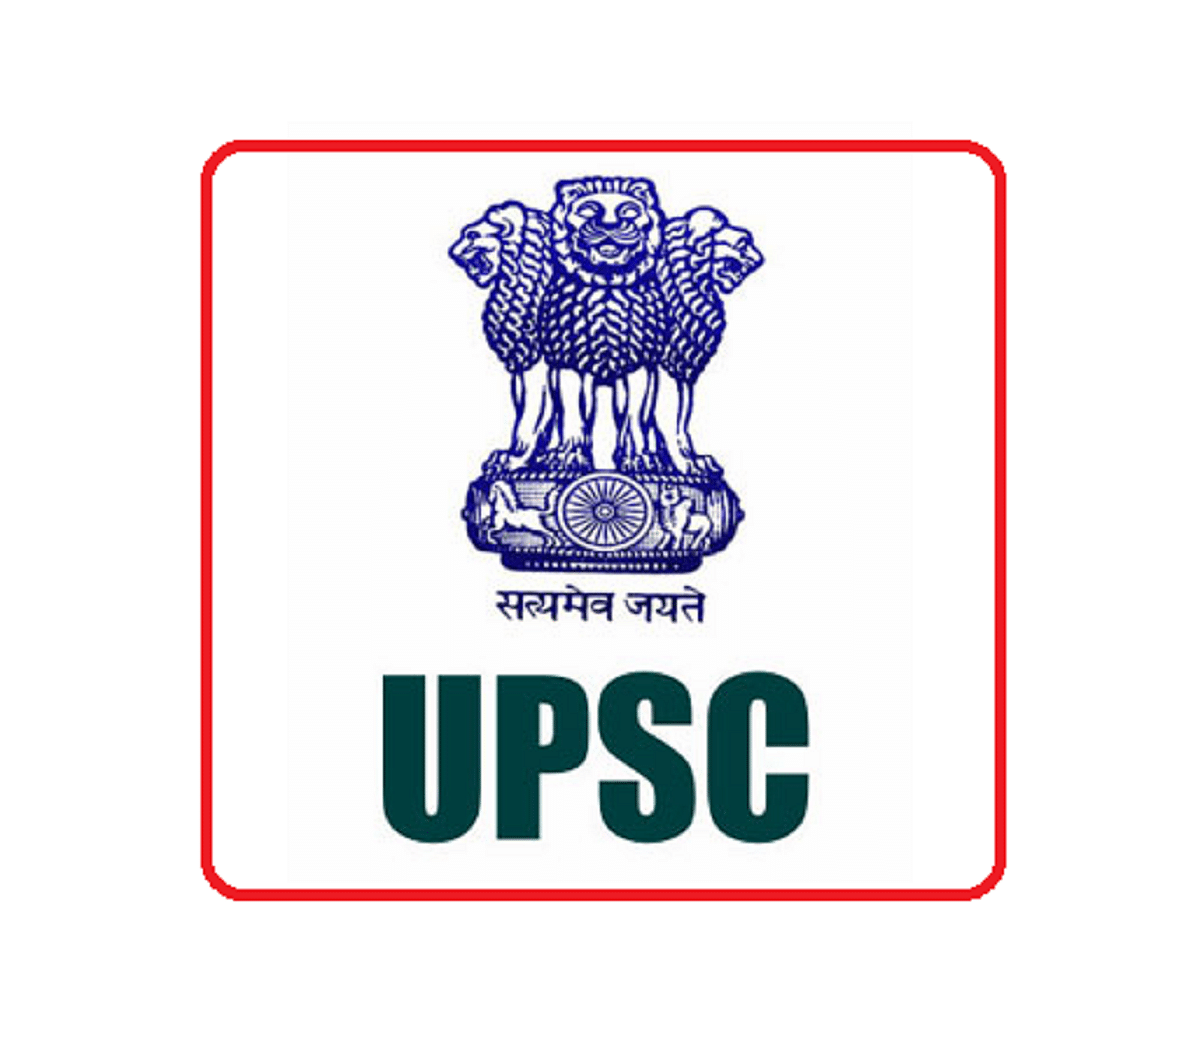 UPSC Civil Services IAS Exam 2021: Graduates can Apply till March 24, Exam to Be Held in June